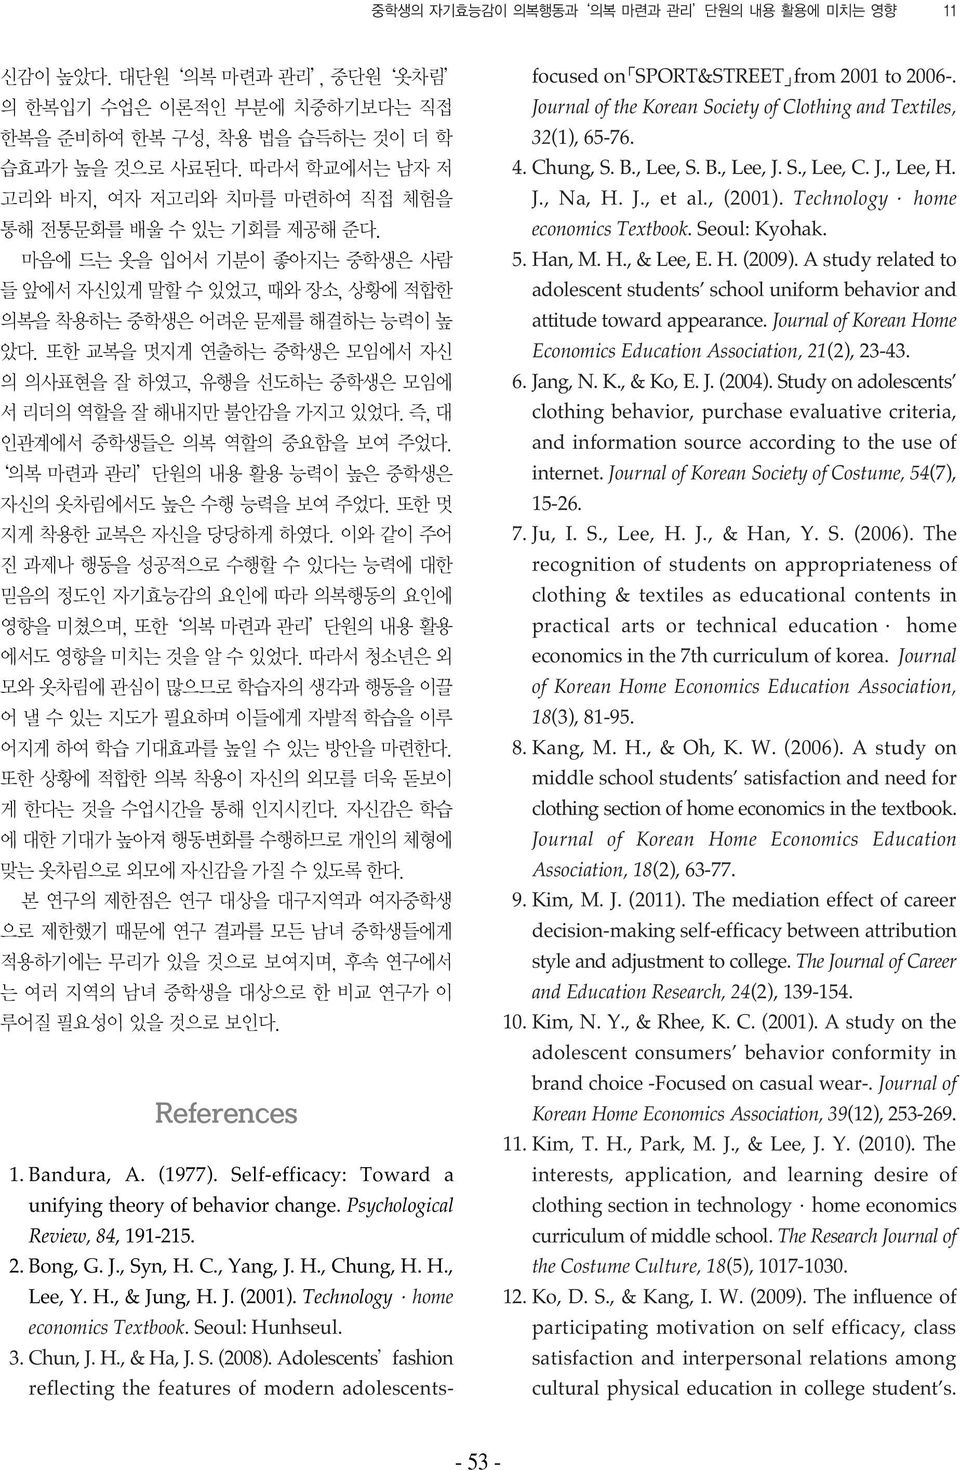 Journal of the Korean Society of Clothing and Textiles, 32(1), 65-76. 4. Chung, S. B., Lee, S. B., Lee, J. S., Lee, C. J., Lee, H. J., Na, H. J., et al., (2001). Technology home economics Textbook.